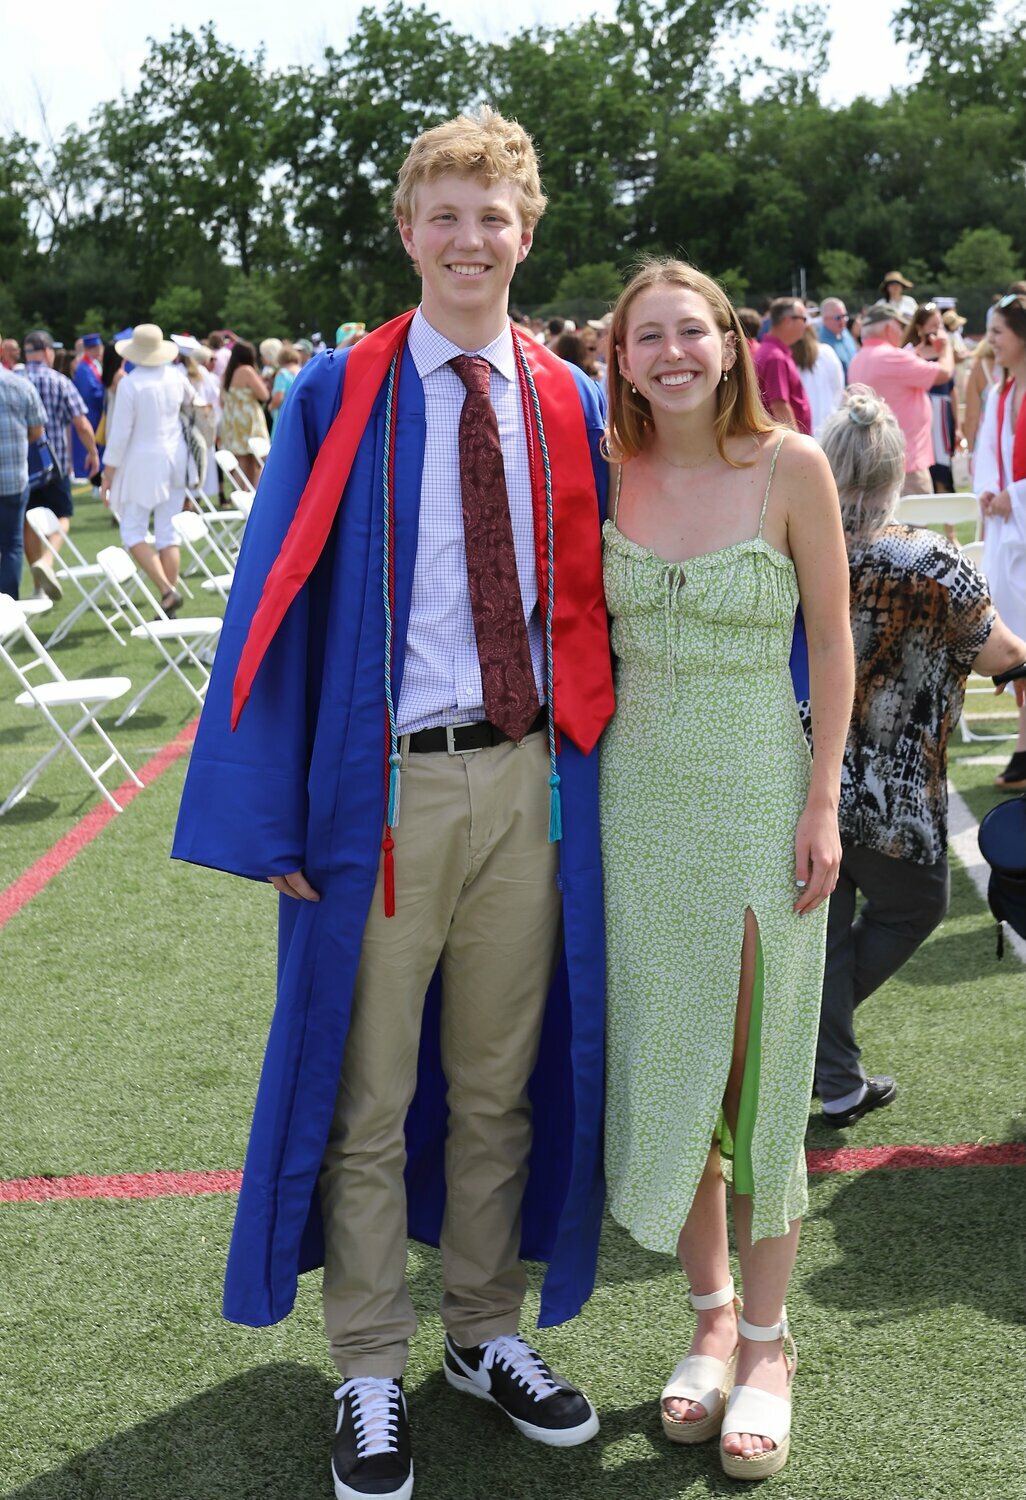 Connor Boyle and his sister, Mackenzie, at his high school graduation in June 2022.